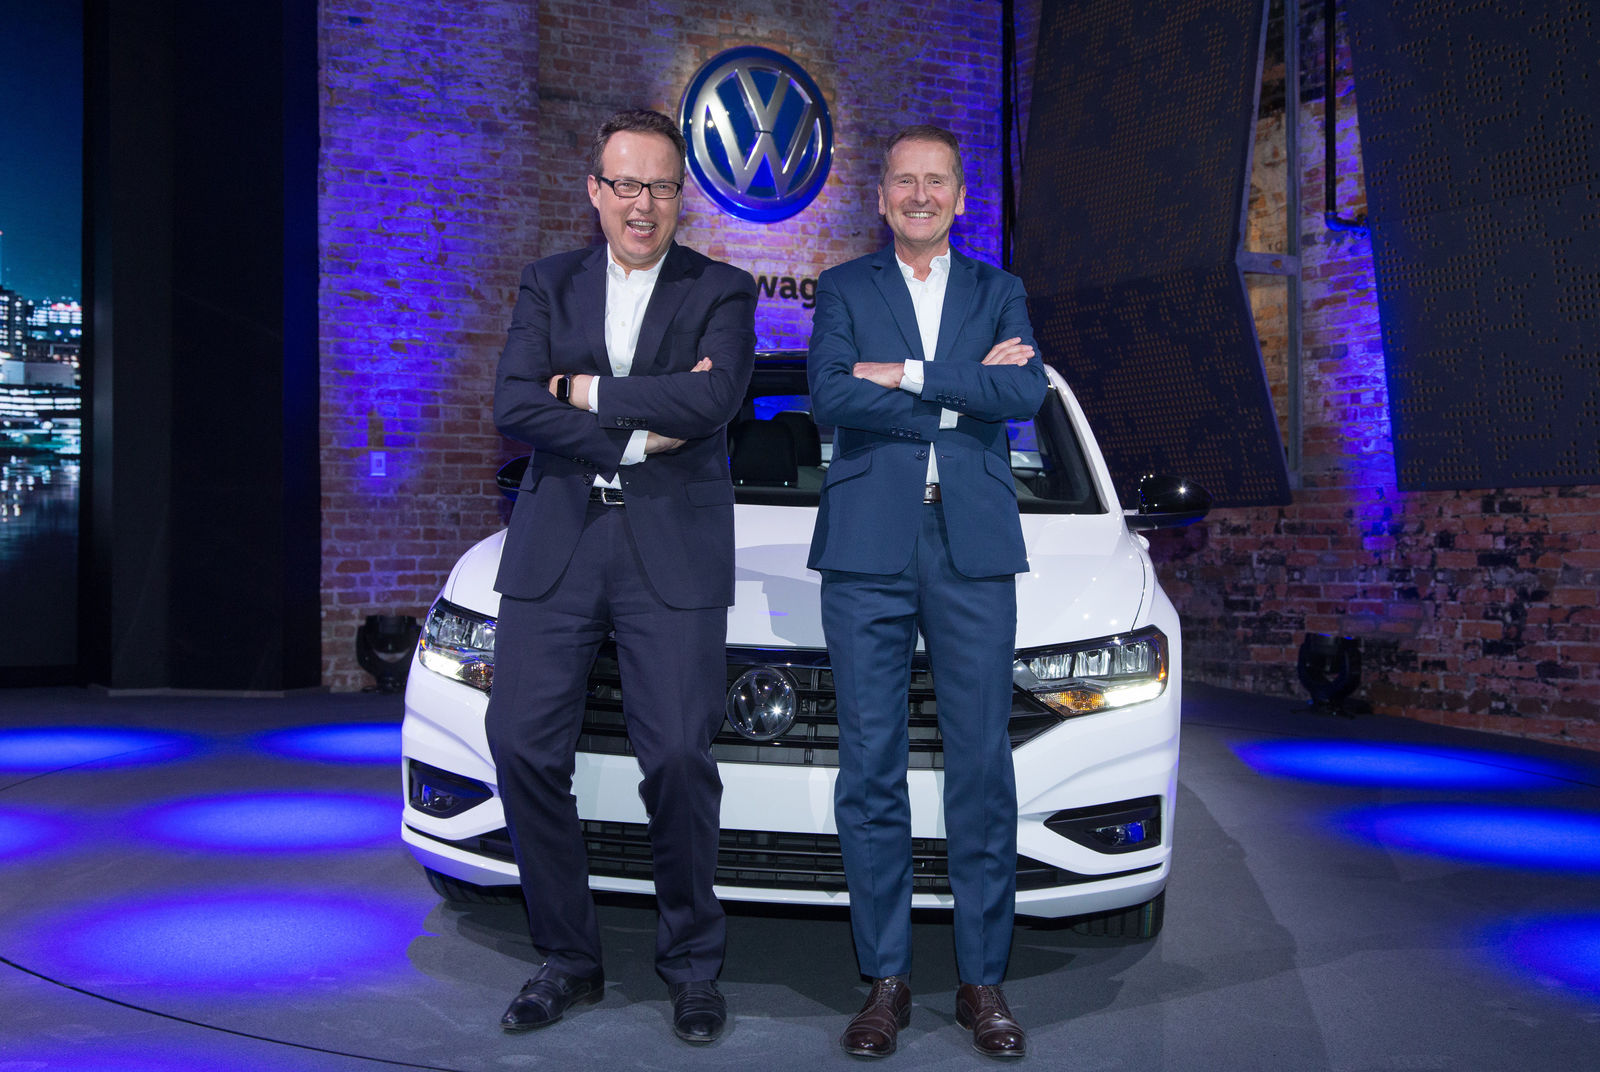 Volkswagen makes rapid progress in realigning its North American strategy